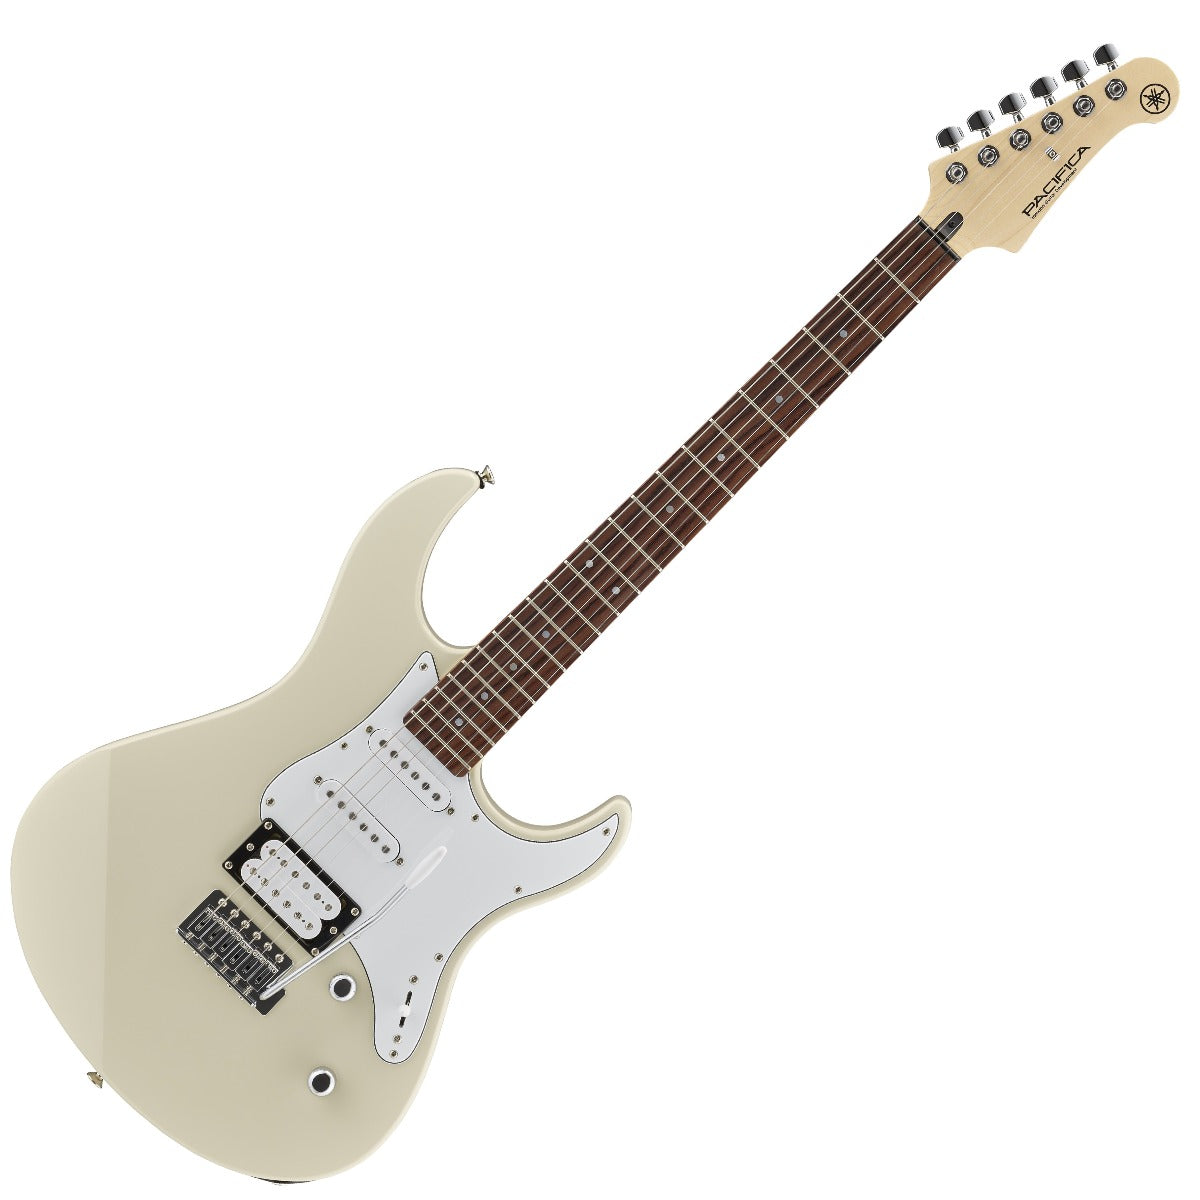 Yamaha Pacifica PAC112V Electric Guitar - Vintage White